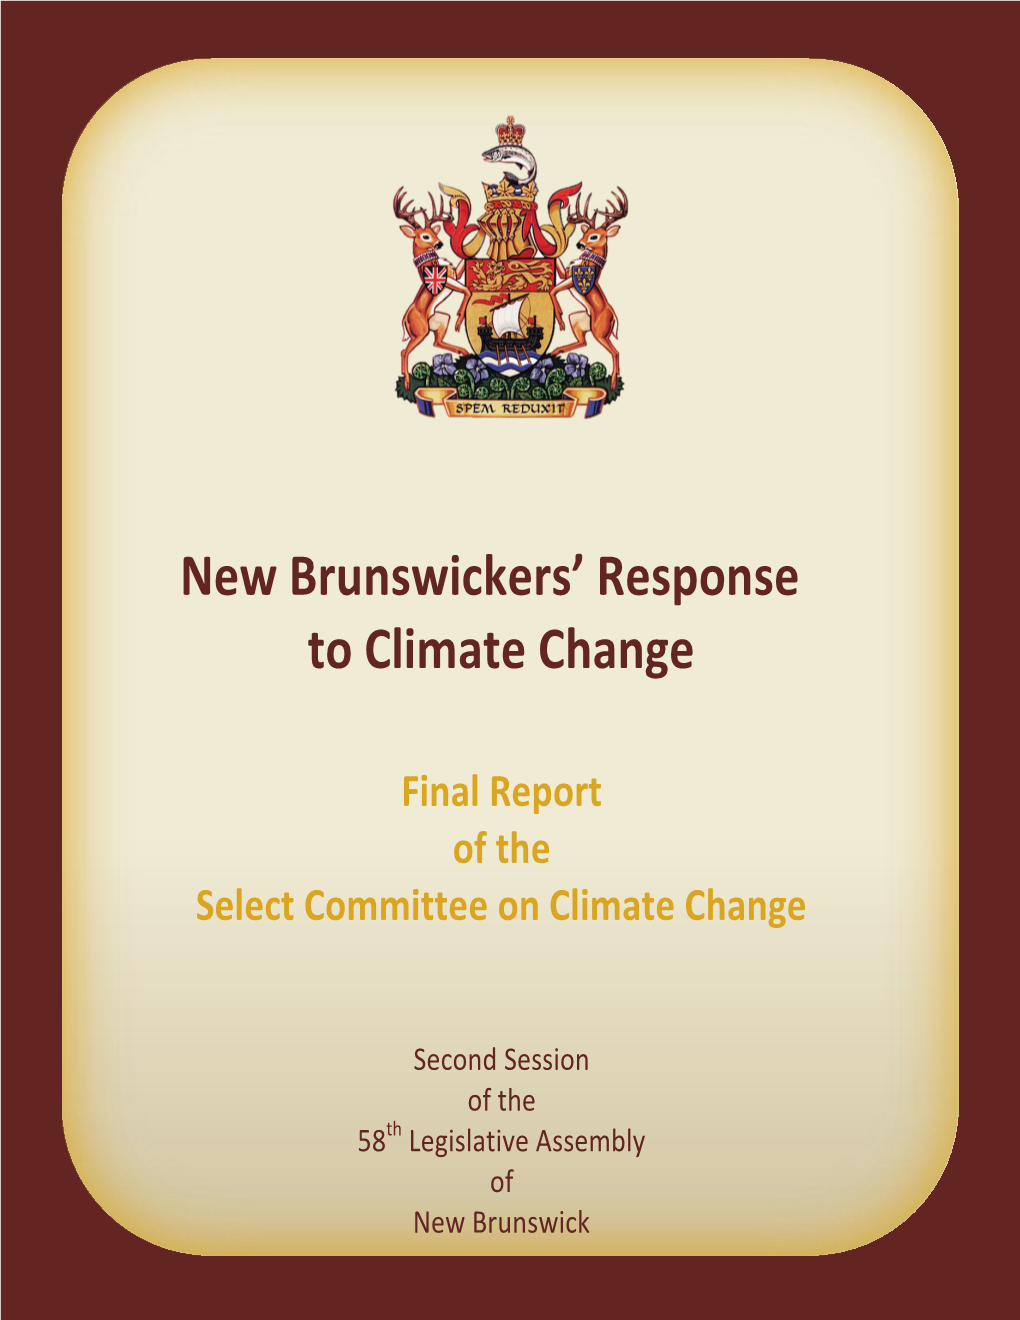 Final Report of the Select Committee on Climate Change